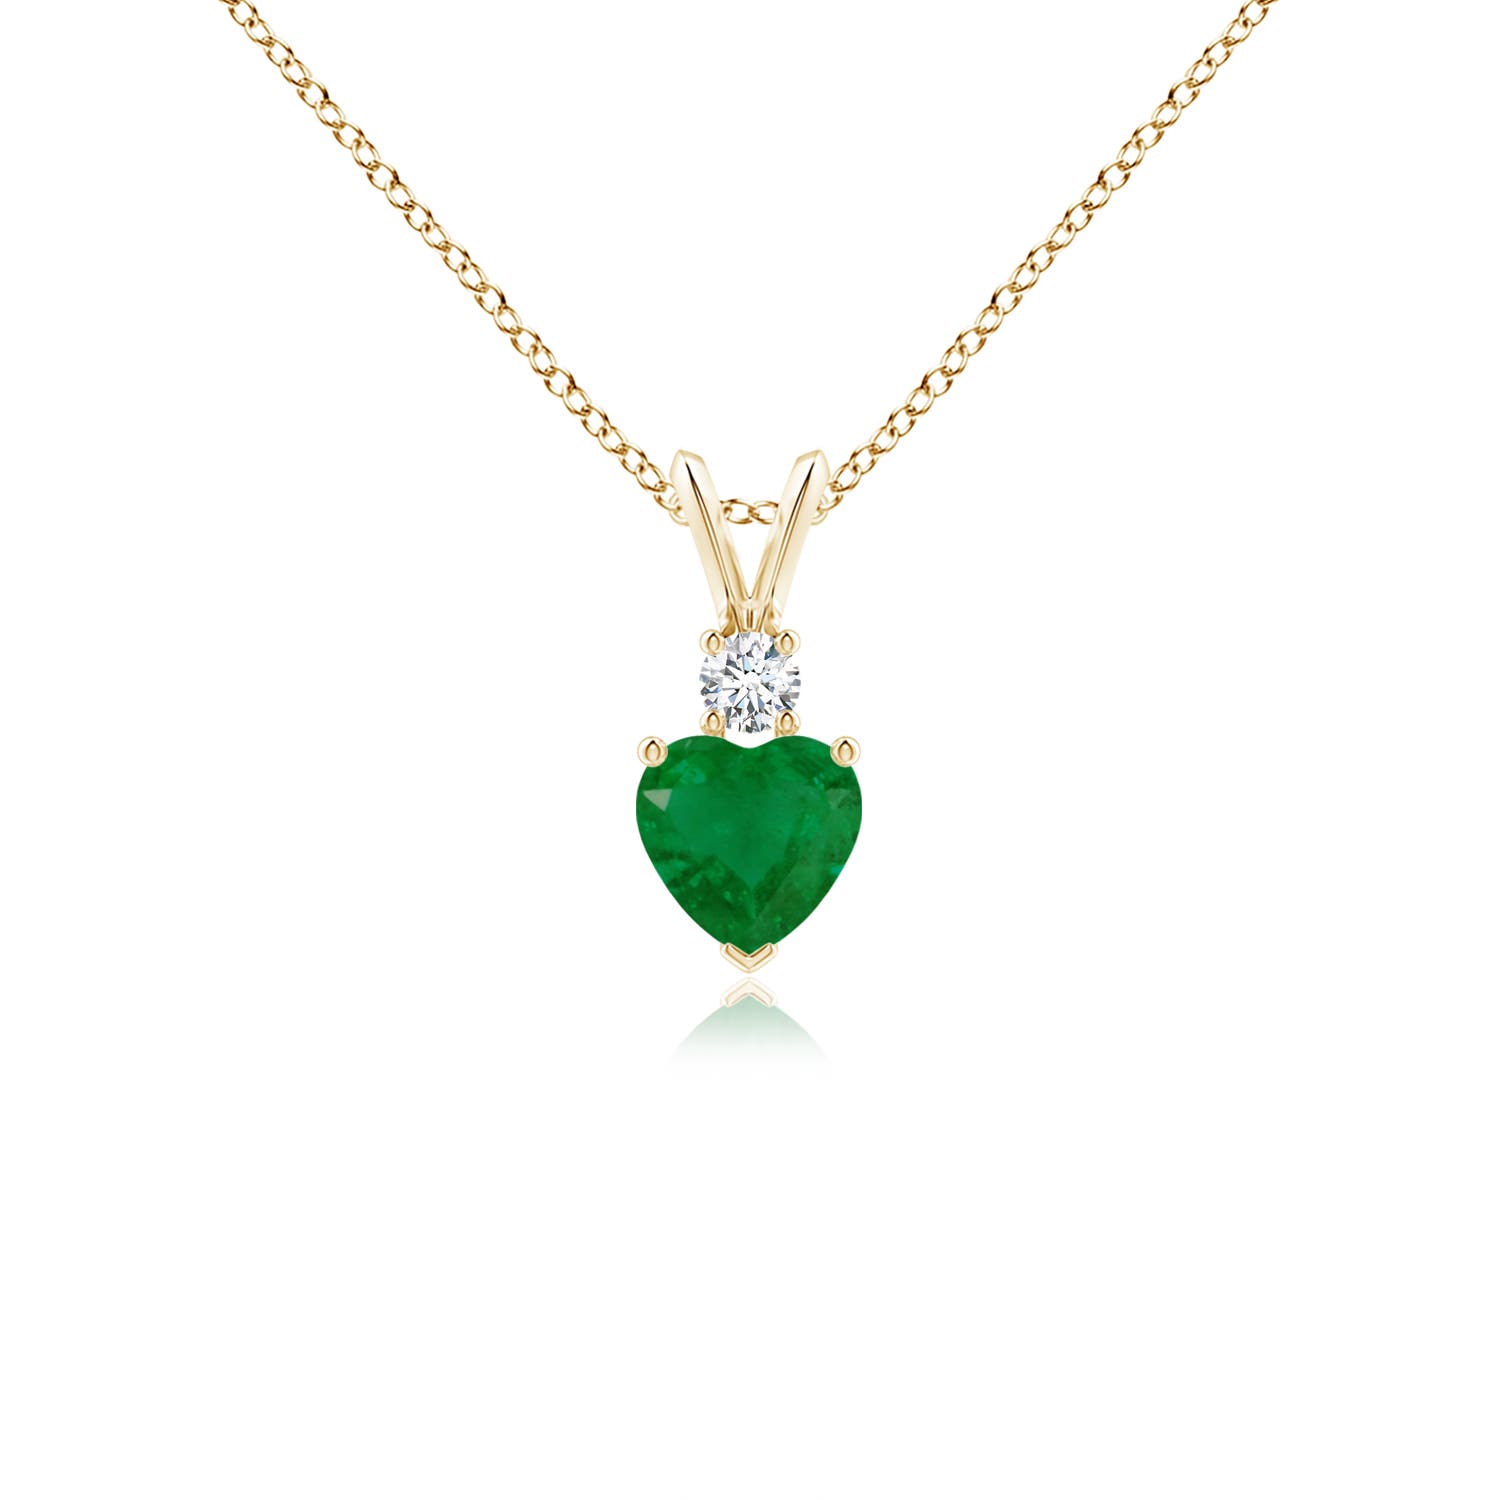 A - Emerald / 0.44 CT / 14 KT Yellow Gold